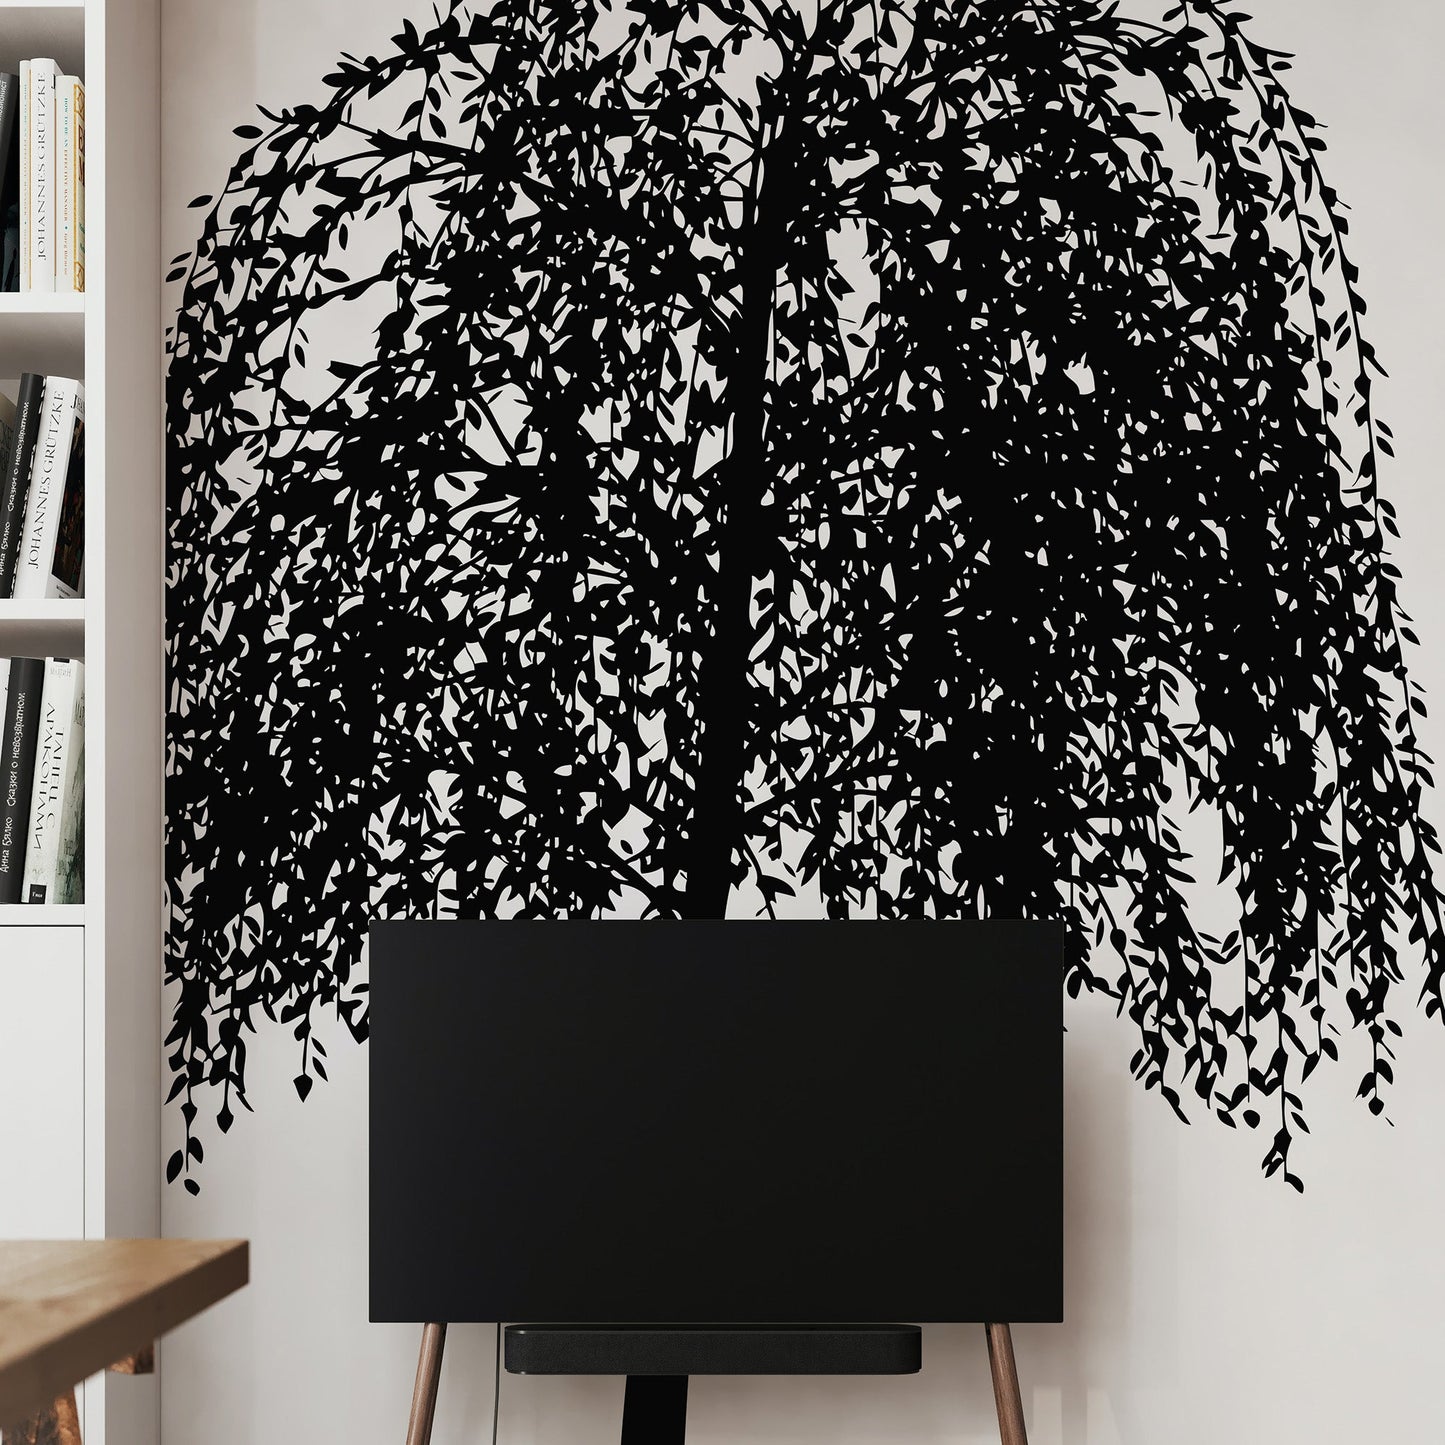 Weeping Willow Tree Wall Decal Sticker. #6707